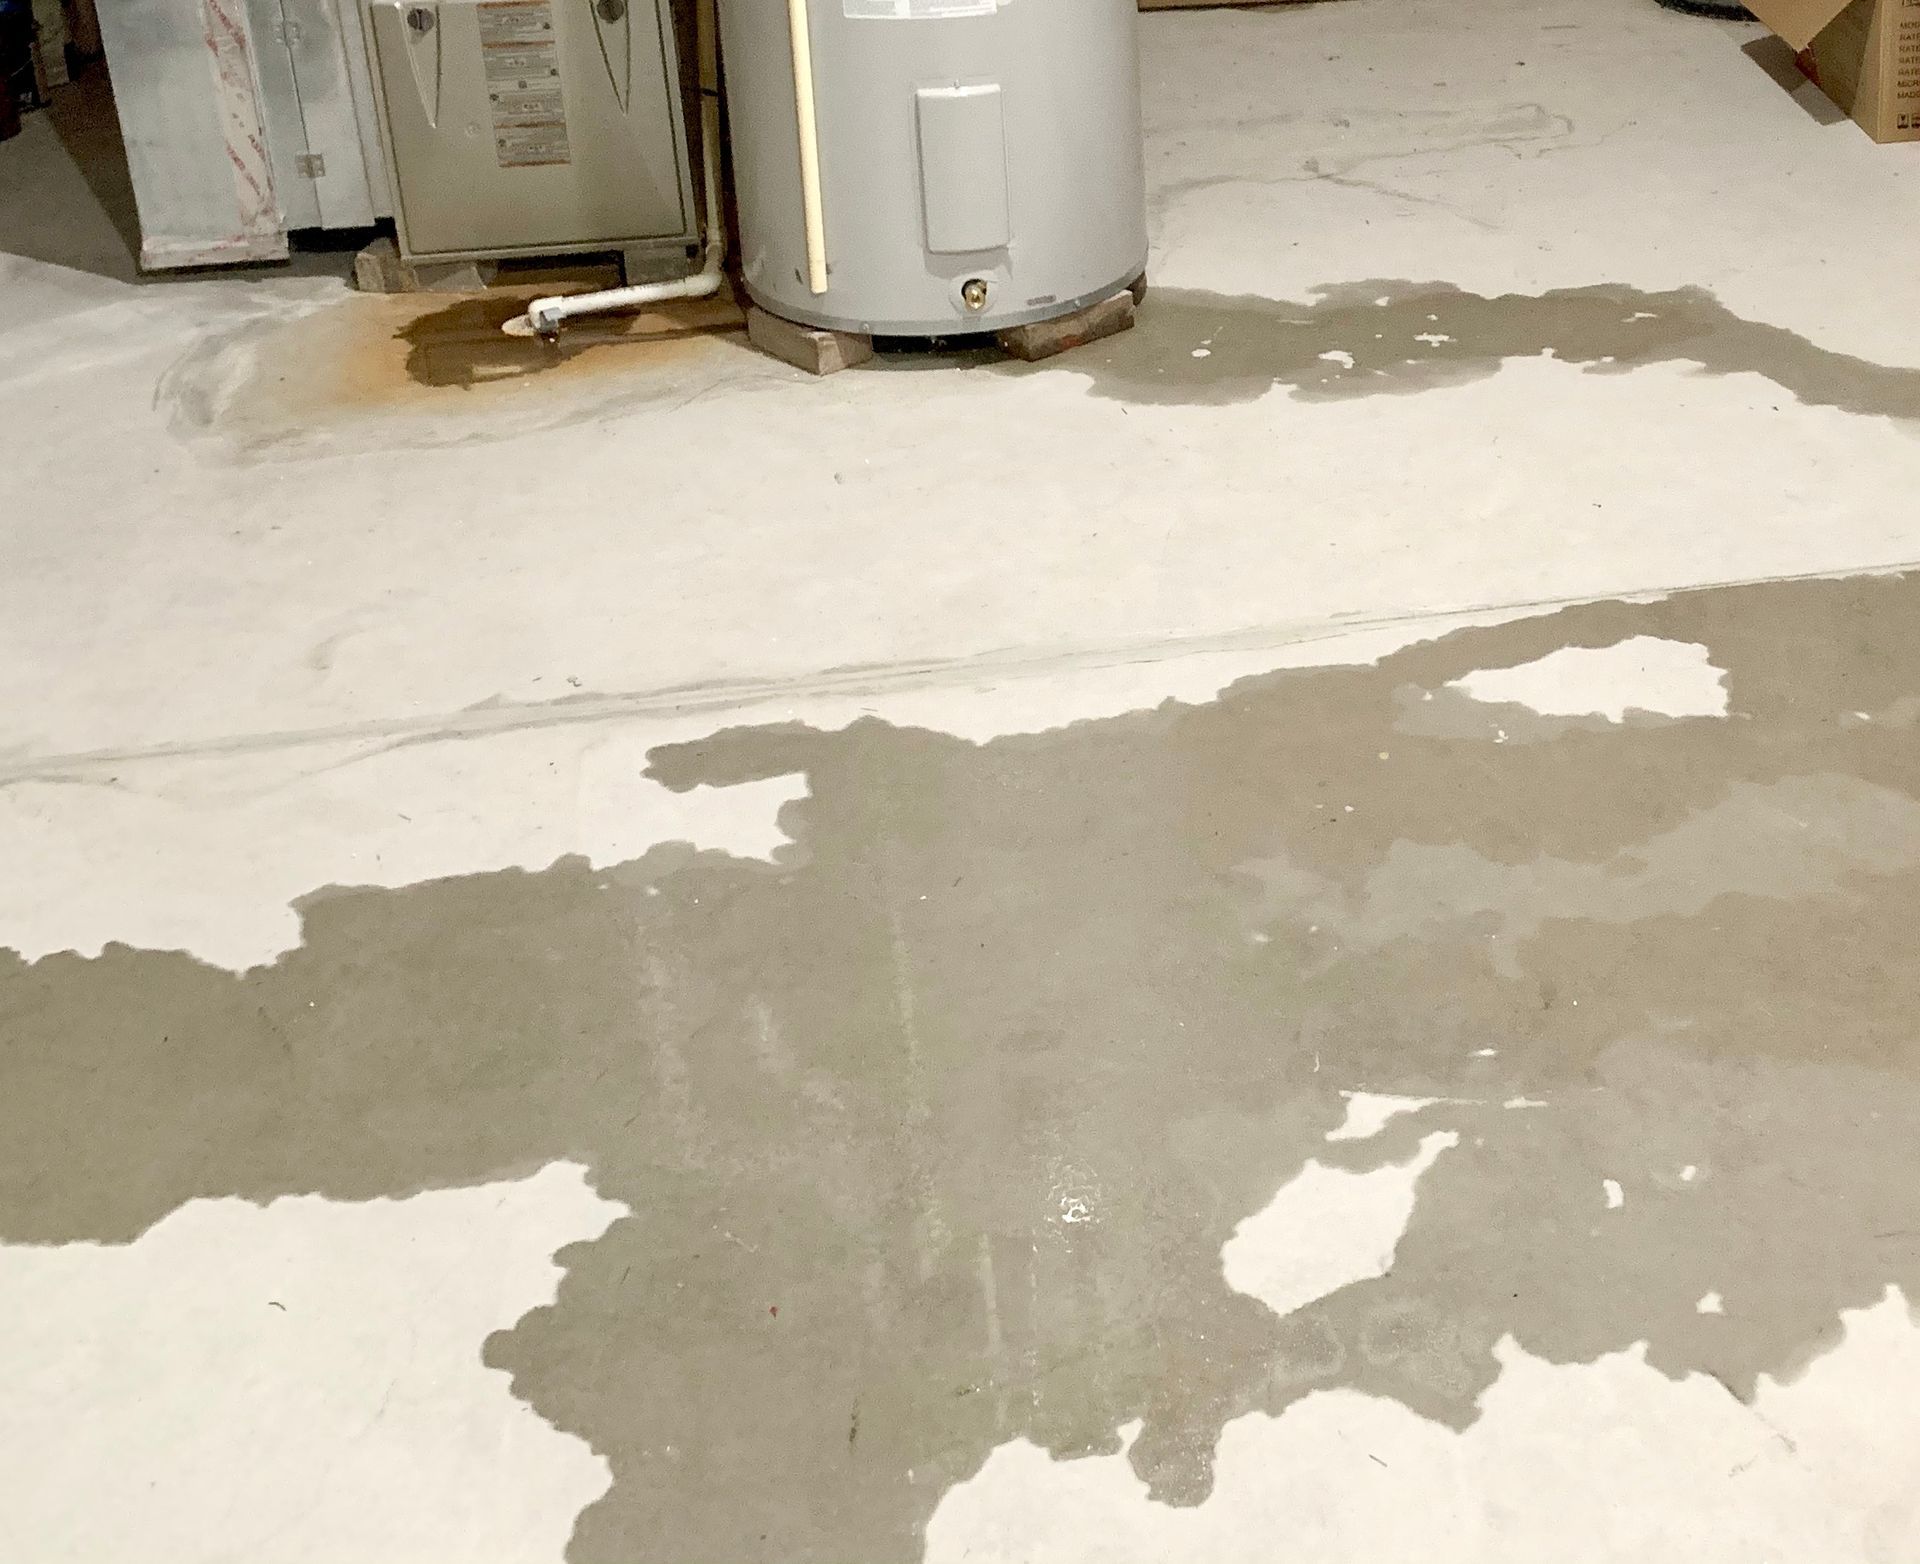 Dry Out Now: Proven Strategies to Fix Your Wet Basement Woes